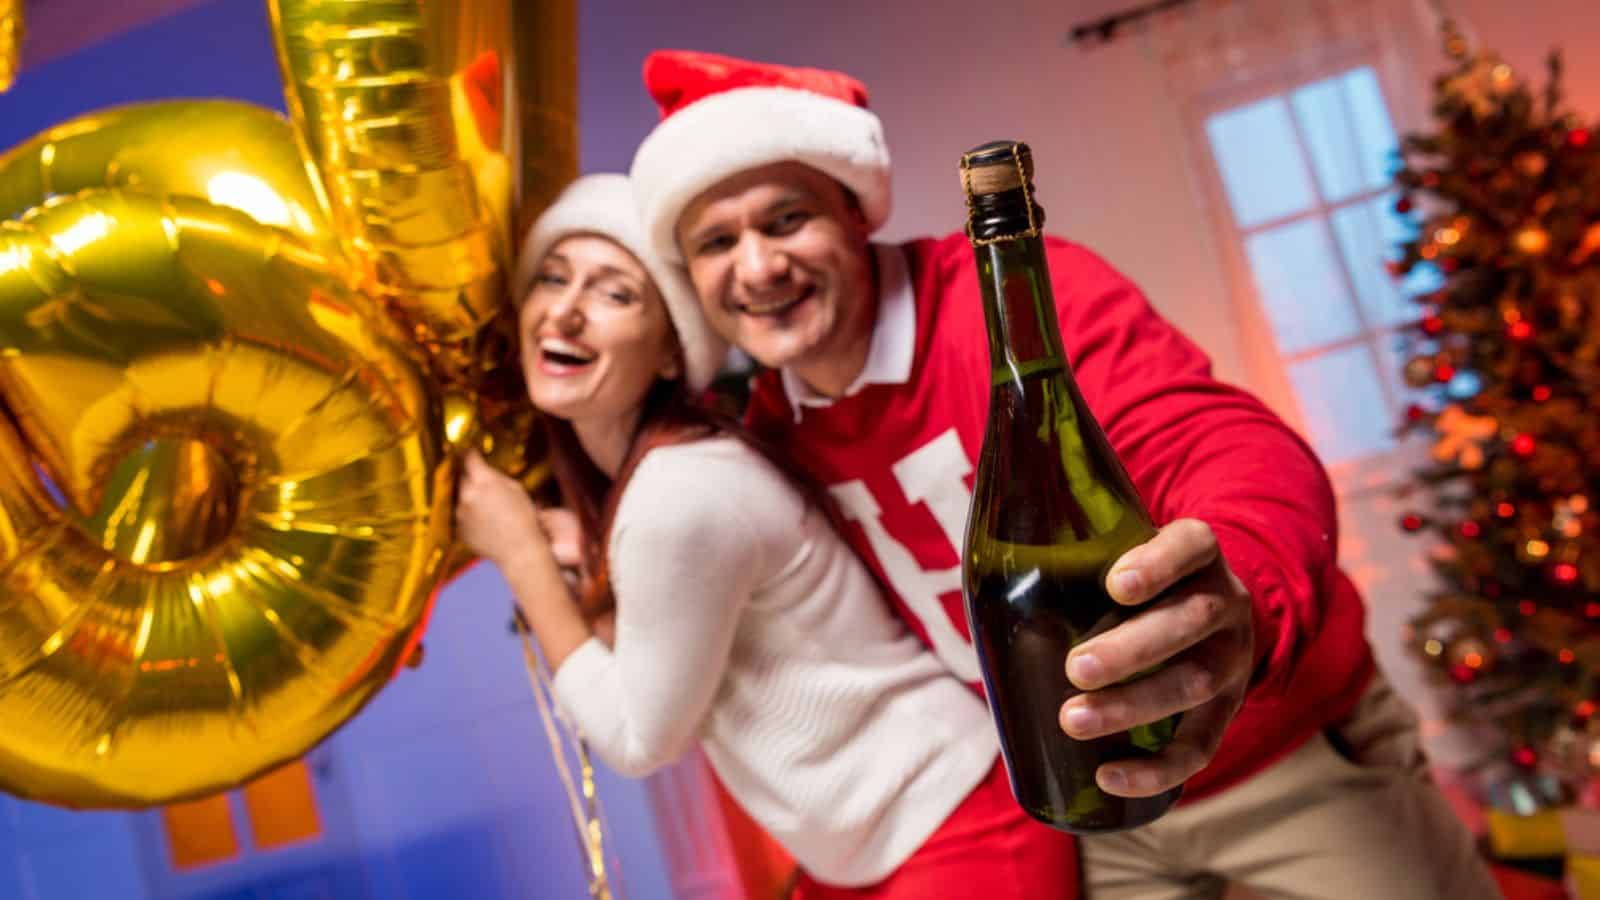 Couple with balloons and champagne bottle